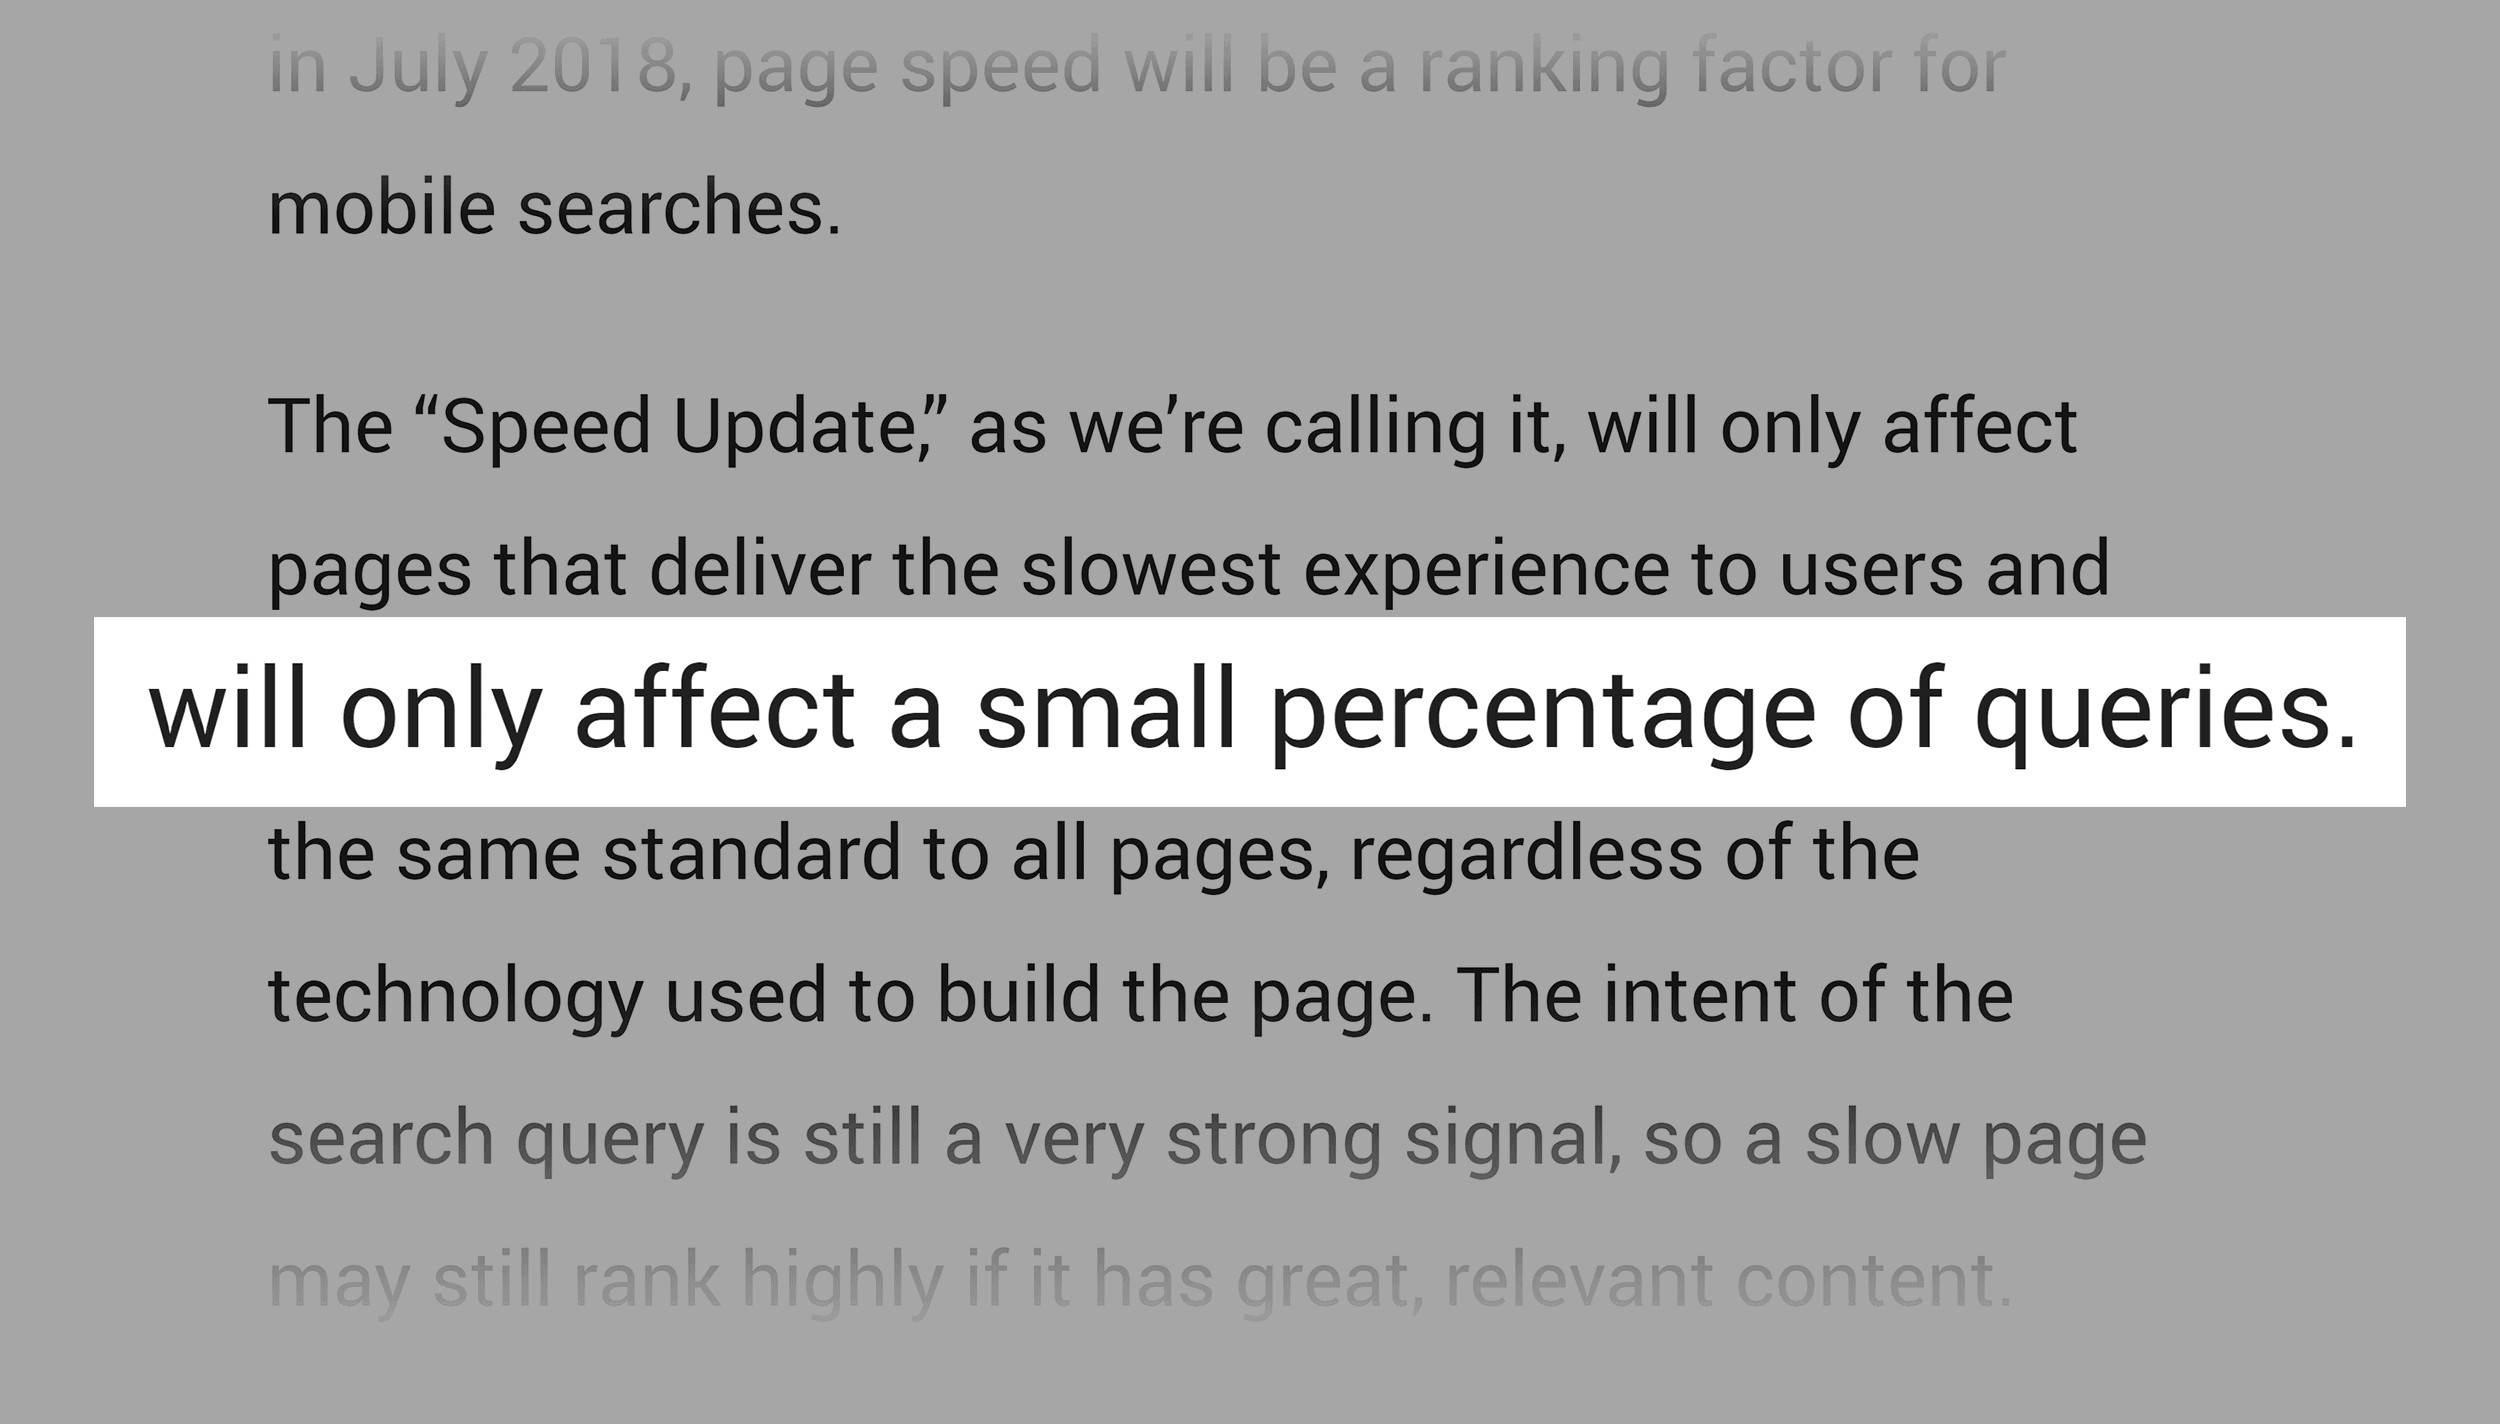 Speed update only affecting small percentage of queries